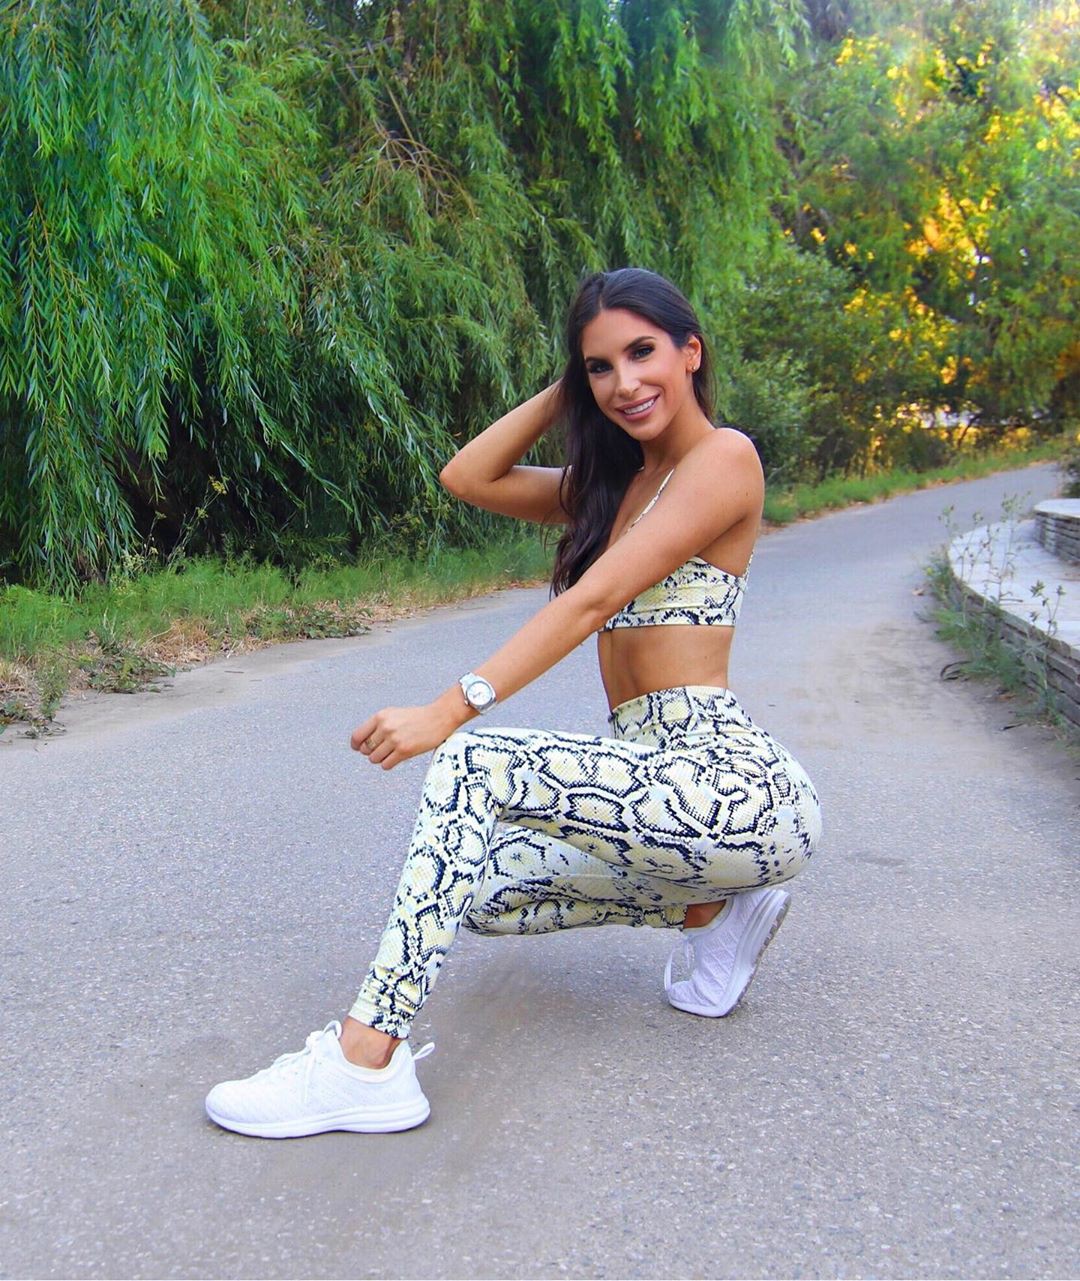 Perfect style for jen selter age, Jen Selter Workout: United States,  Fitness Model,  Ally Brooke,  Hot Instagram Models,  Jen Selter,  Niykee Heaton,  Girls With Muscles  